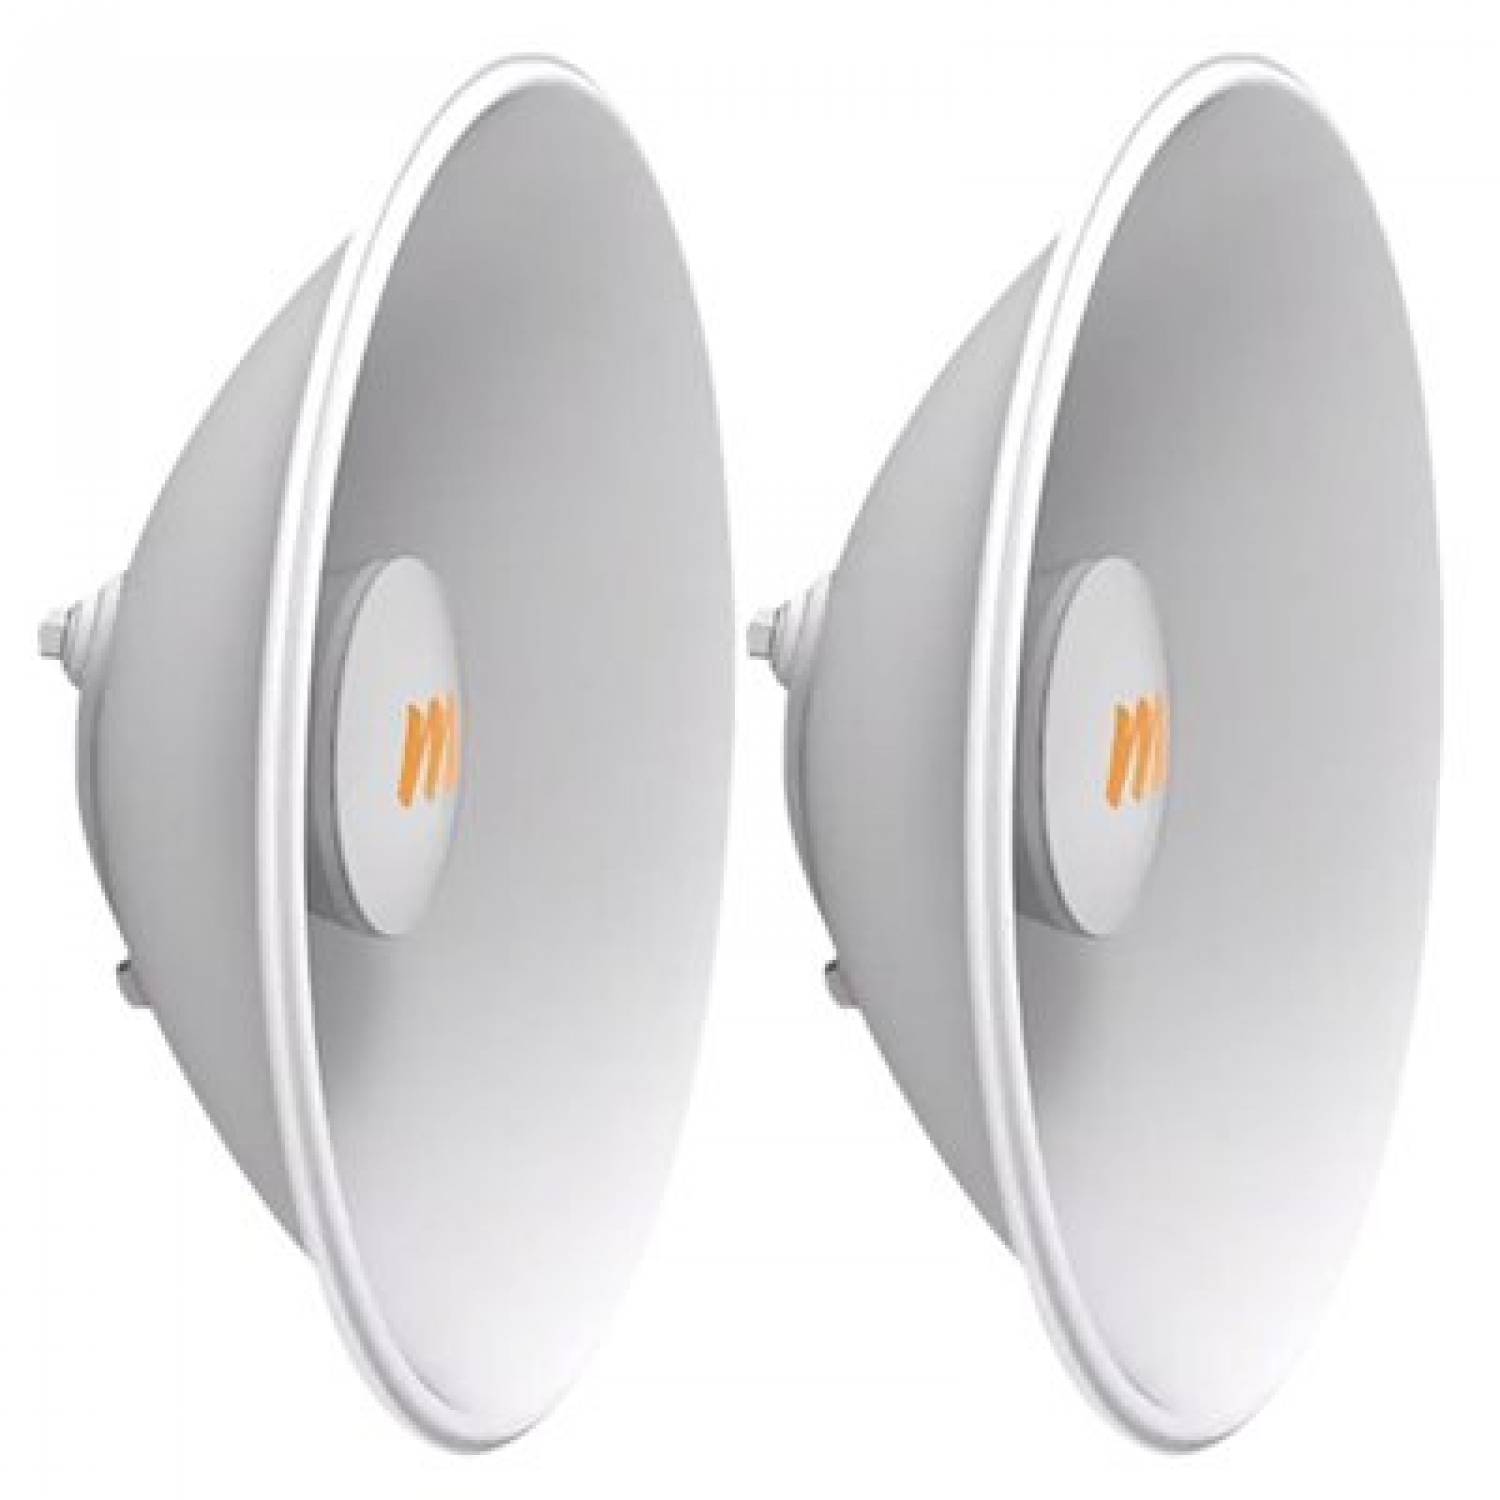 Mimosa N5-X20 - 2 Pack, 4.9-6.4 GHz Modular Twist-on Antenna, 250mm Dish for C5x only, 20 dBi gain - Contains 2 Antenna Assemblies